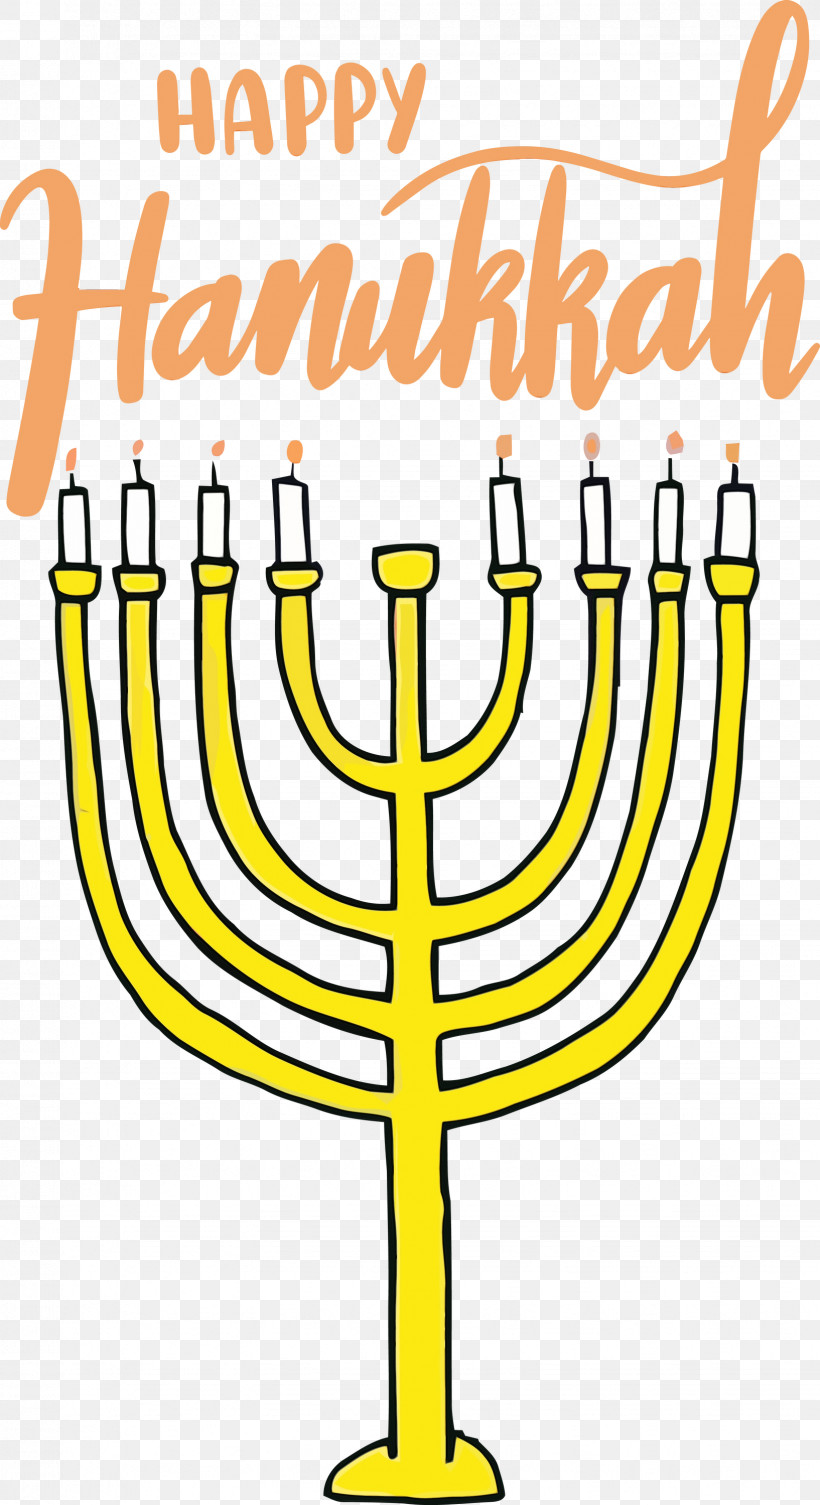 Candle Holder Yellow Candle Line Meter, PNG, 1634x3000px, Hanukkah, Candle, Candle Holder, Candlestick, Geometry Download Free